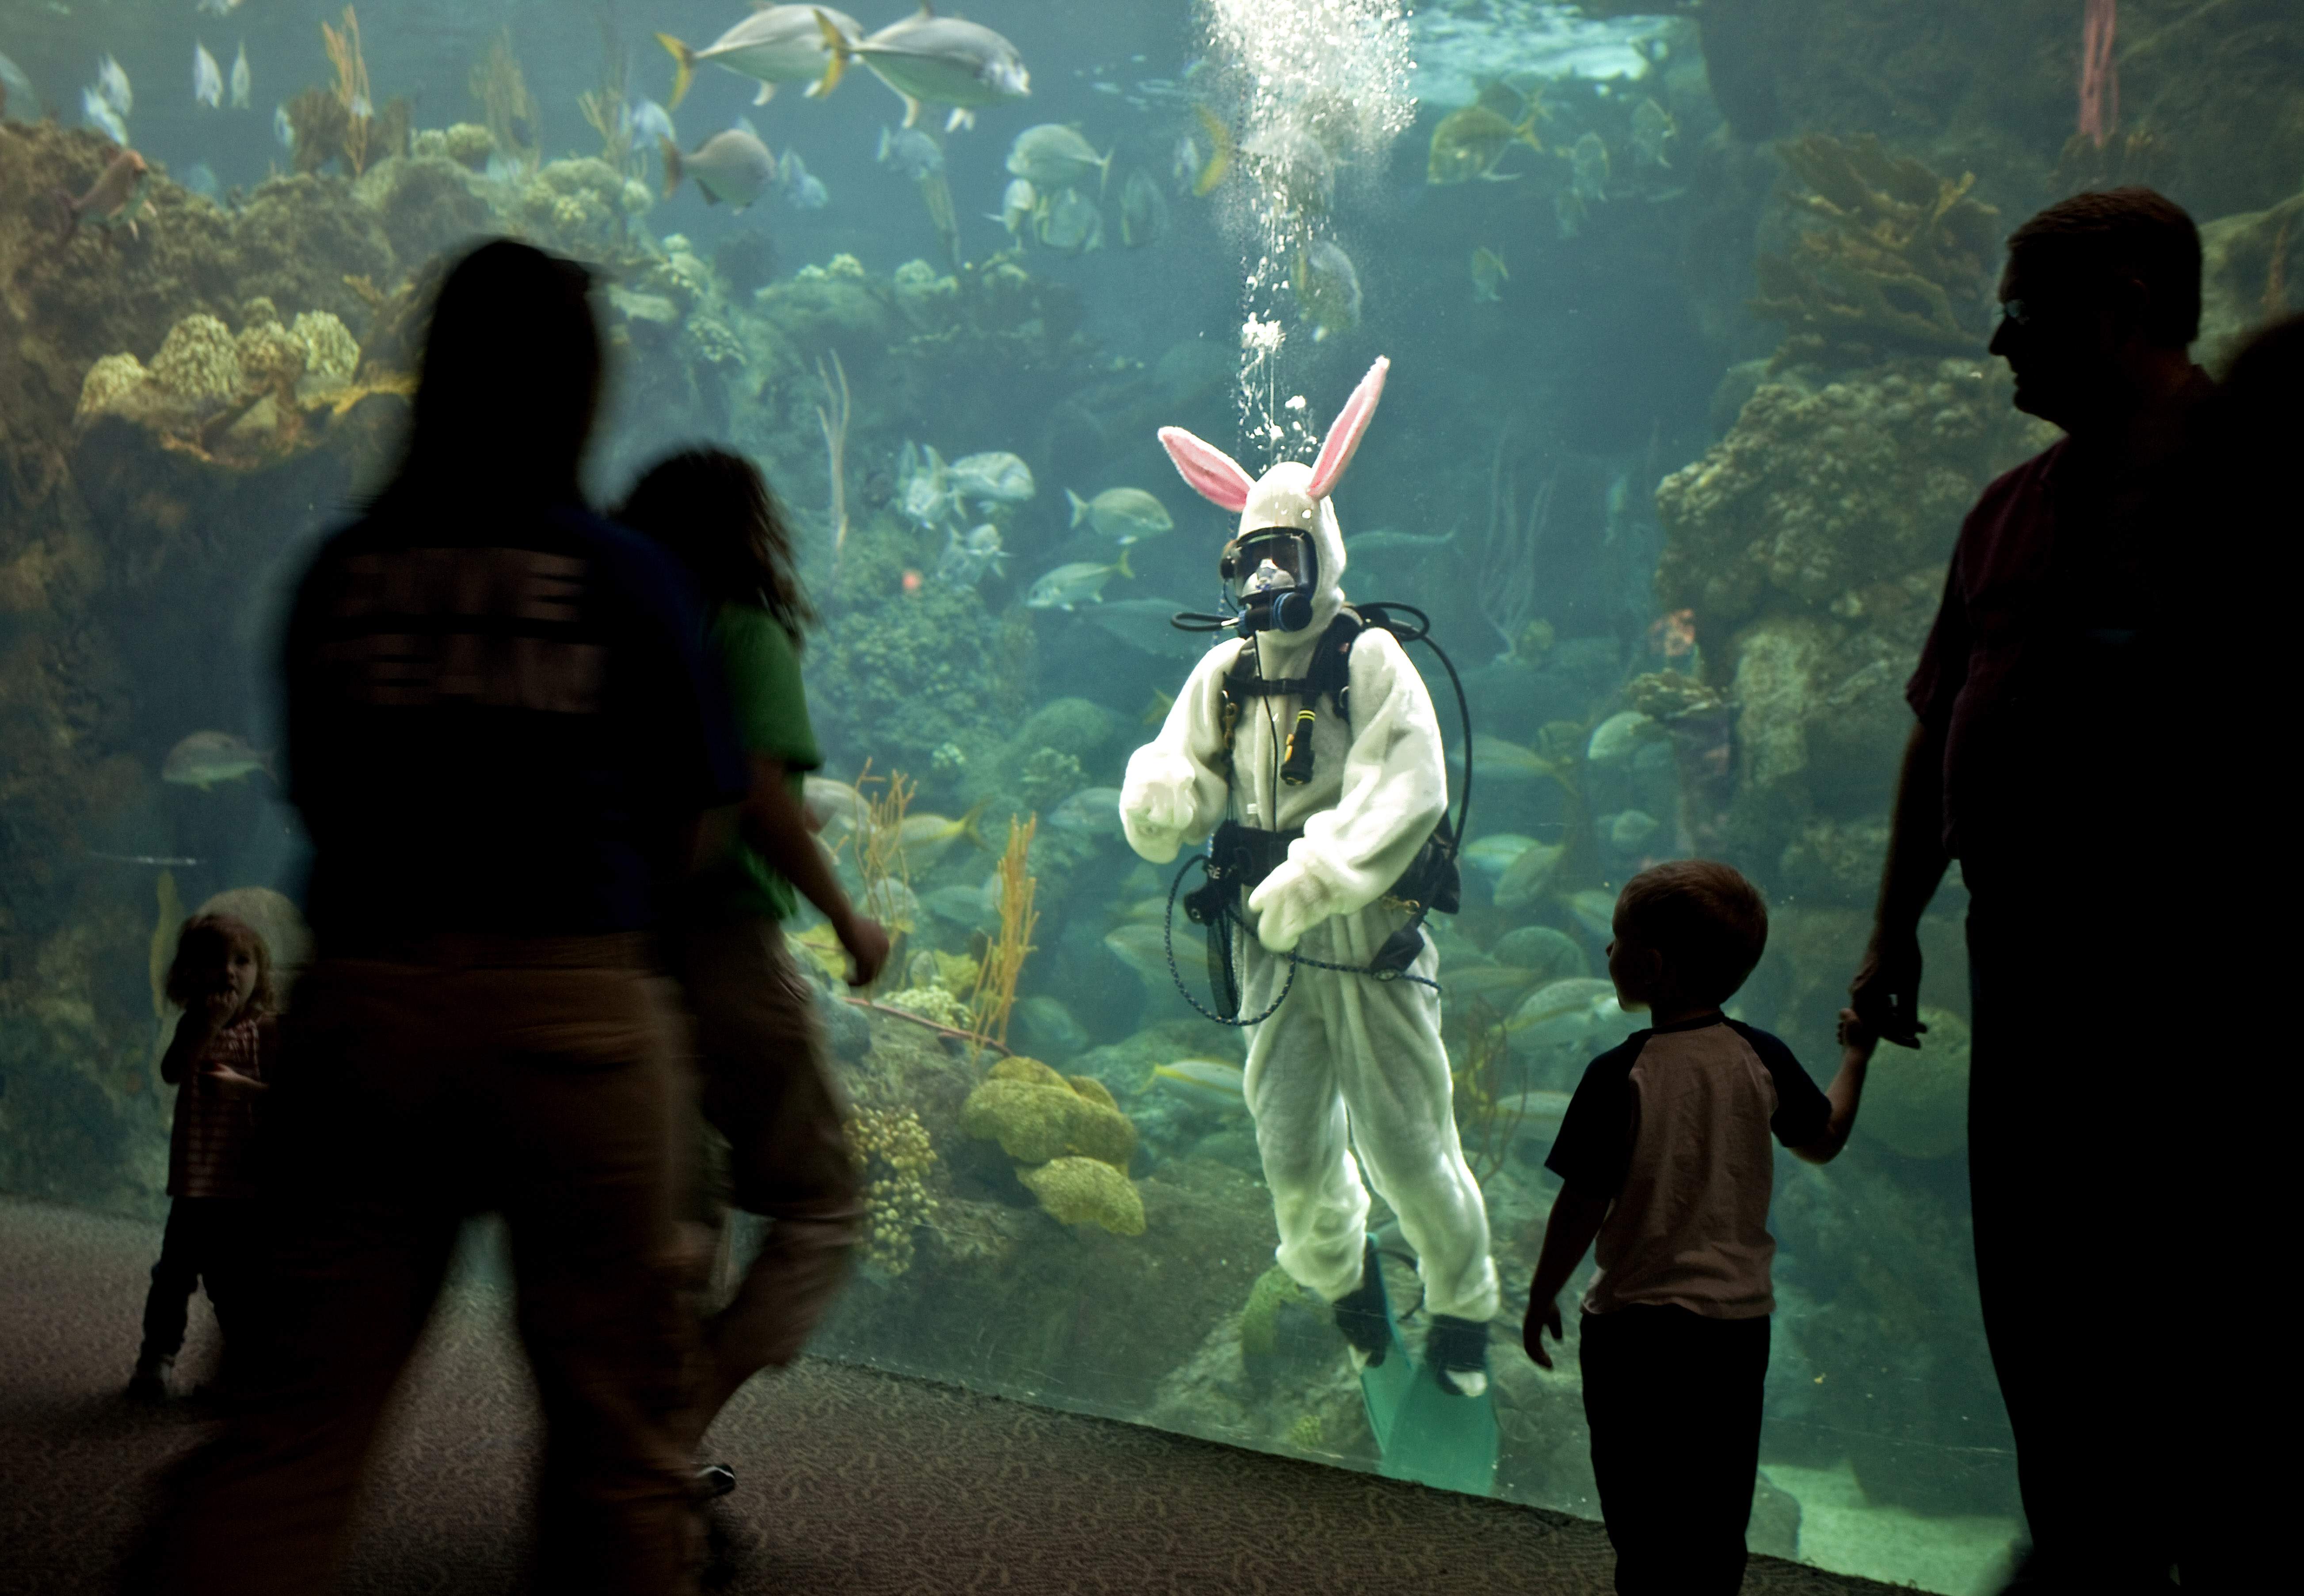 Easter events in Tampa Bay, from egg hunts to services